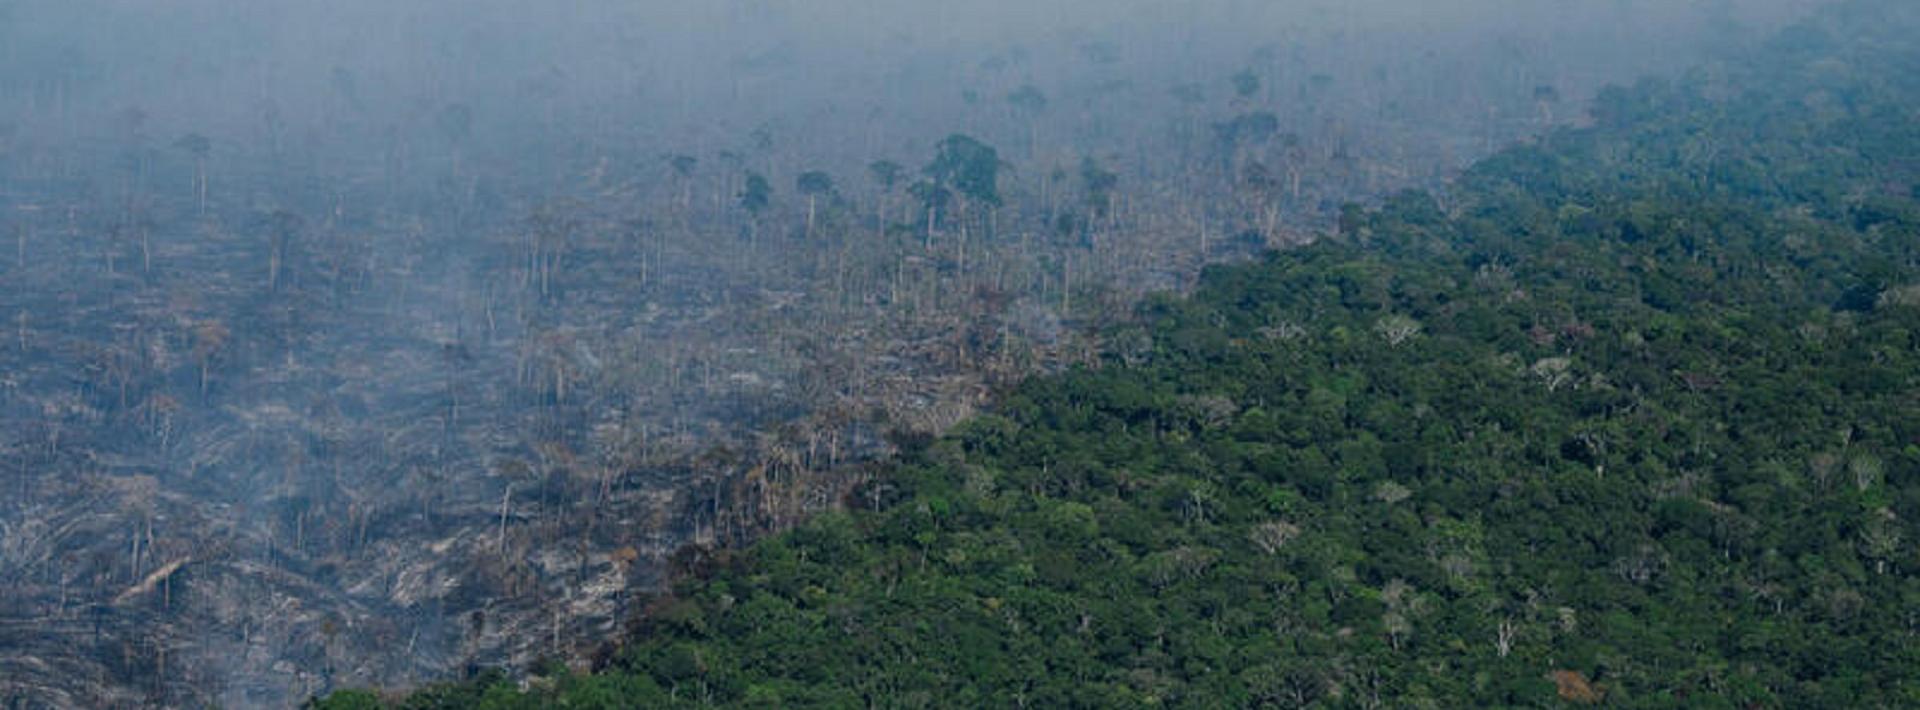 a bird's eye view image with one half of a large forest still green while the other half is decimated and logged